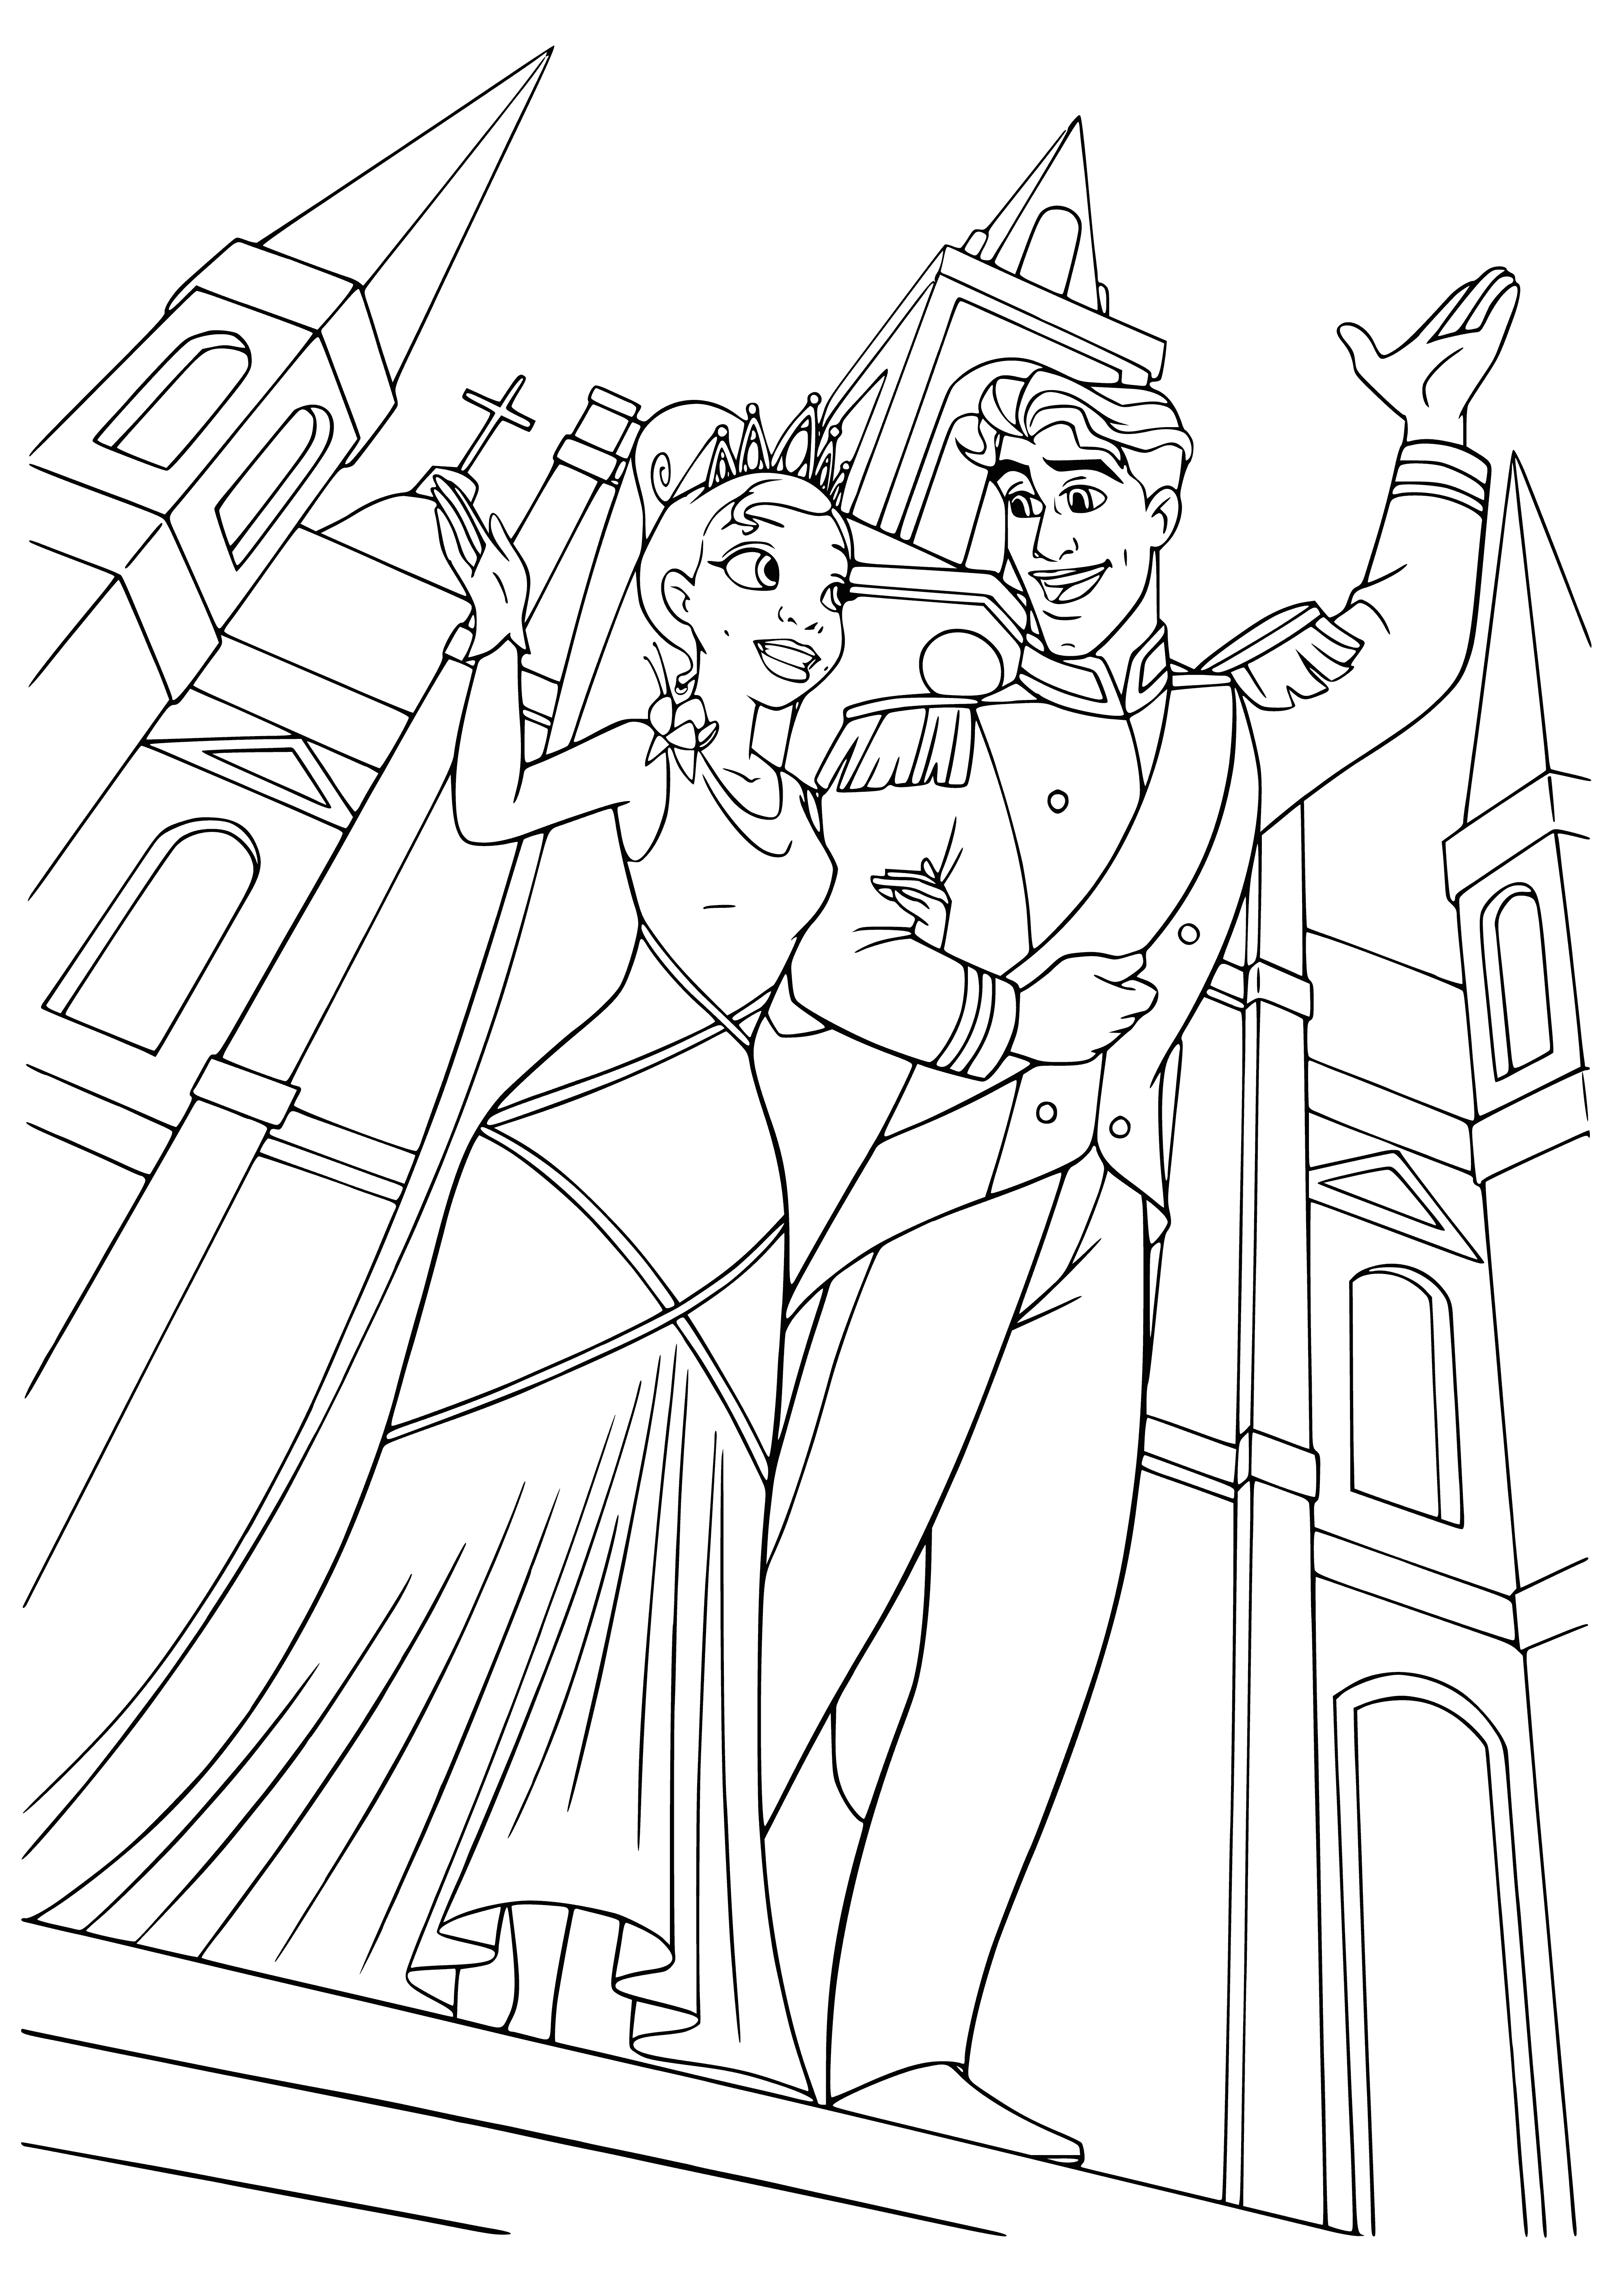 coloring page: Couple in wedding attire stands in the center of coloring page surrounded by people, trees, and flowers. They hold hands and smile.